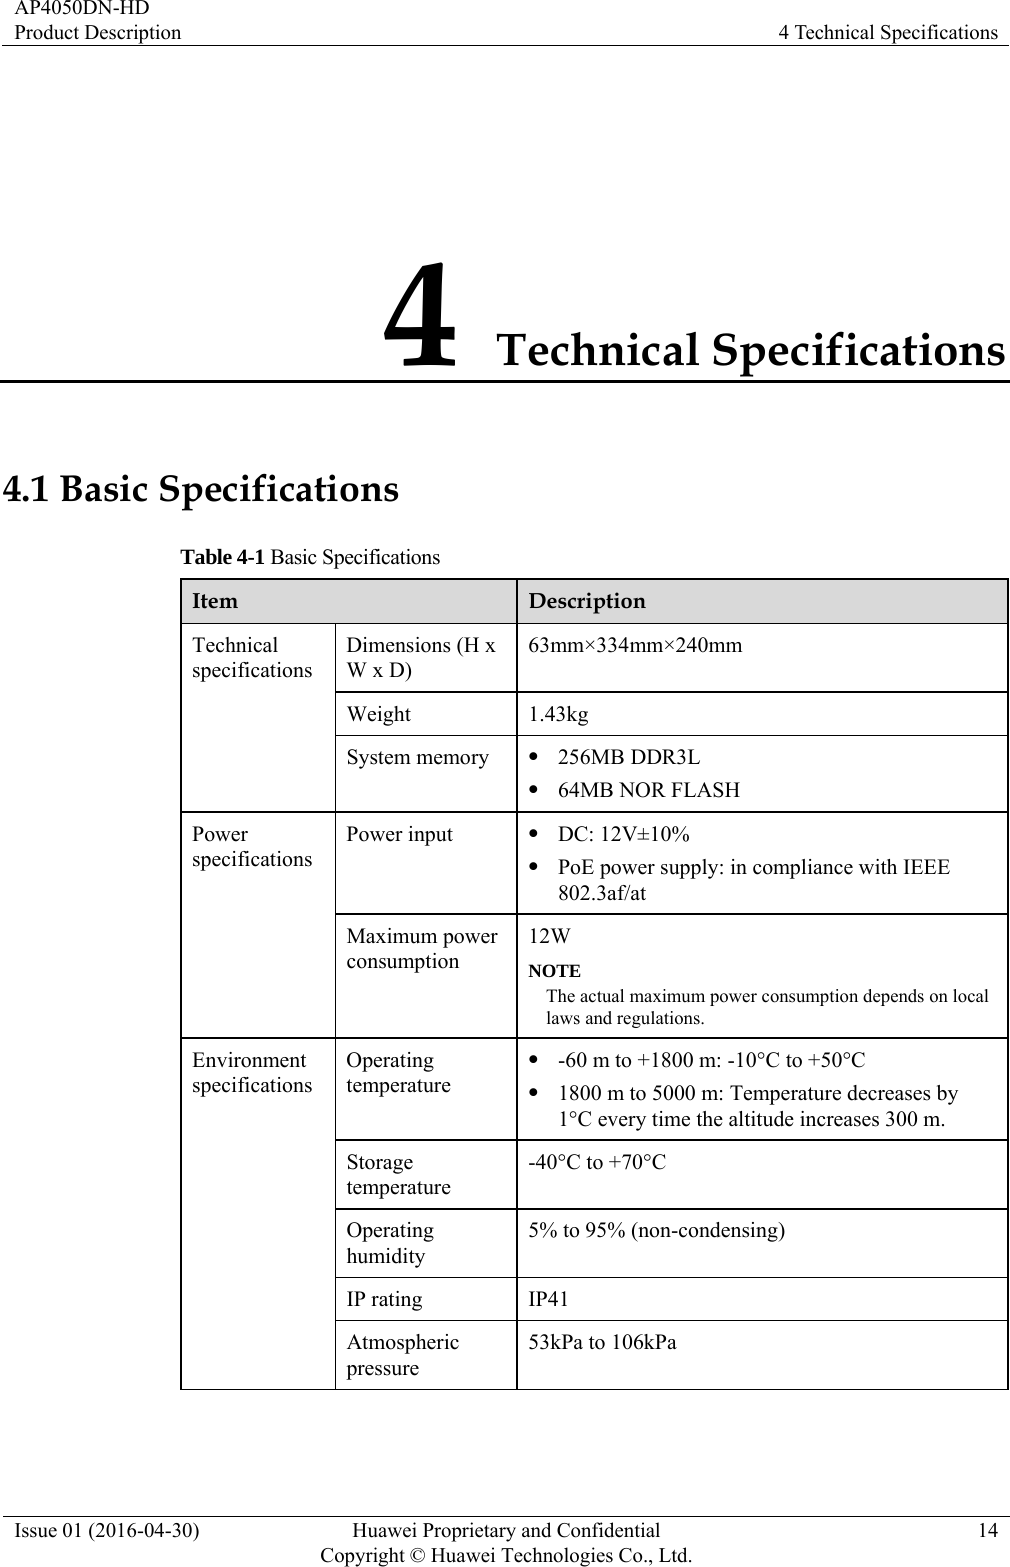 AP4050DN-HD Product Description  4 Technical Specifications Issue 01 (2016-04-30)  Huawei Proprietary and Confidential         Copyright © Huawei Technologies Co., Ltd.14 4 Technical Specifications 4.1 Basic Specifications Table 4-1 Basic Specifications Item  Description Technical specifications Dimensions (H x W x D) 63mm×334mm×240mm Weight 1.43kg System memory   256MB DDR3L  64MB NOR FLASH Power specifications Power input   DC: 12V±10%  PoE power supply: in compliance with IEEE 802.3af/at Maximum power consumption 12W NOTE The actual maximum power consumption depends on local laws and regulations. Environment specifications Operating temperature  -60 m to +1800 m: -10°C to +50°C  1800 m to 5000 m: Temperature decreases by 1°C every time the altitude increases 300 m. Storage temperature -40°C to +70°C Operating humidity 5% to 95% (non-condensing) IP rating  IP41 Atmospheric pressure 53kPa to 106kPa  